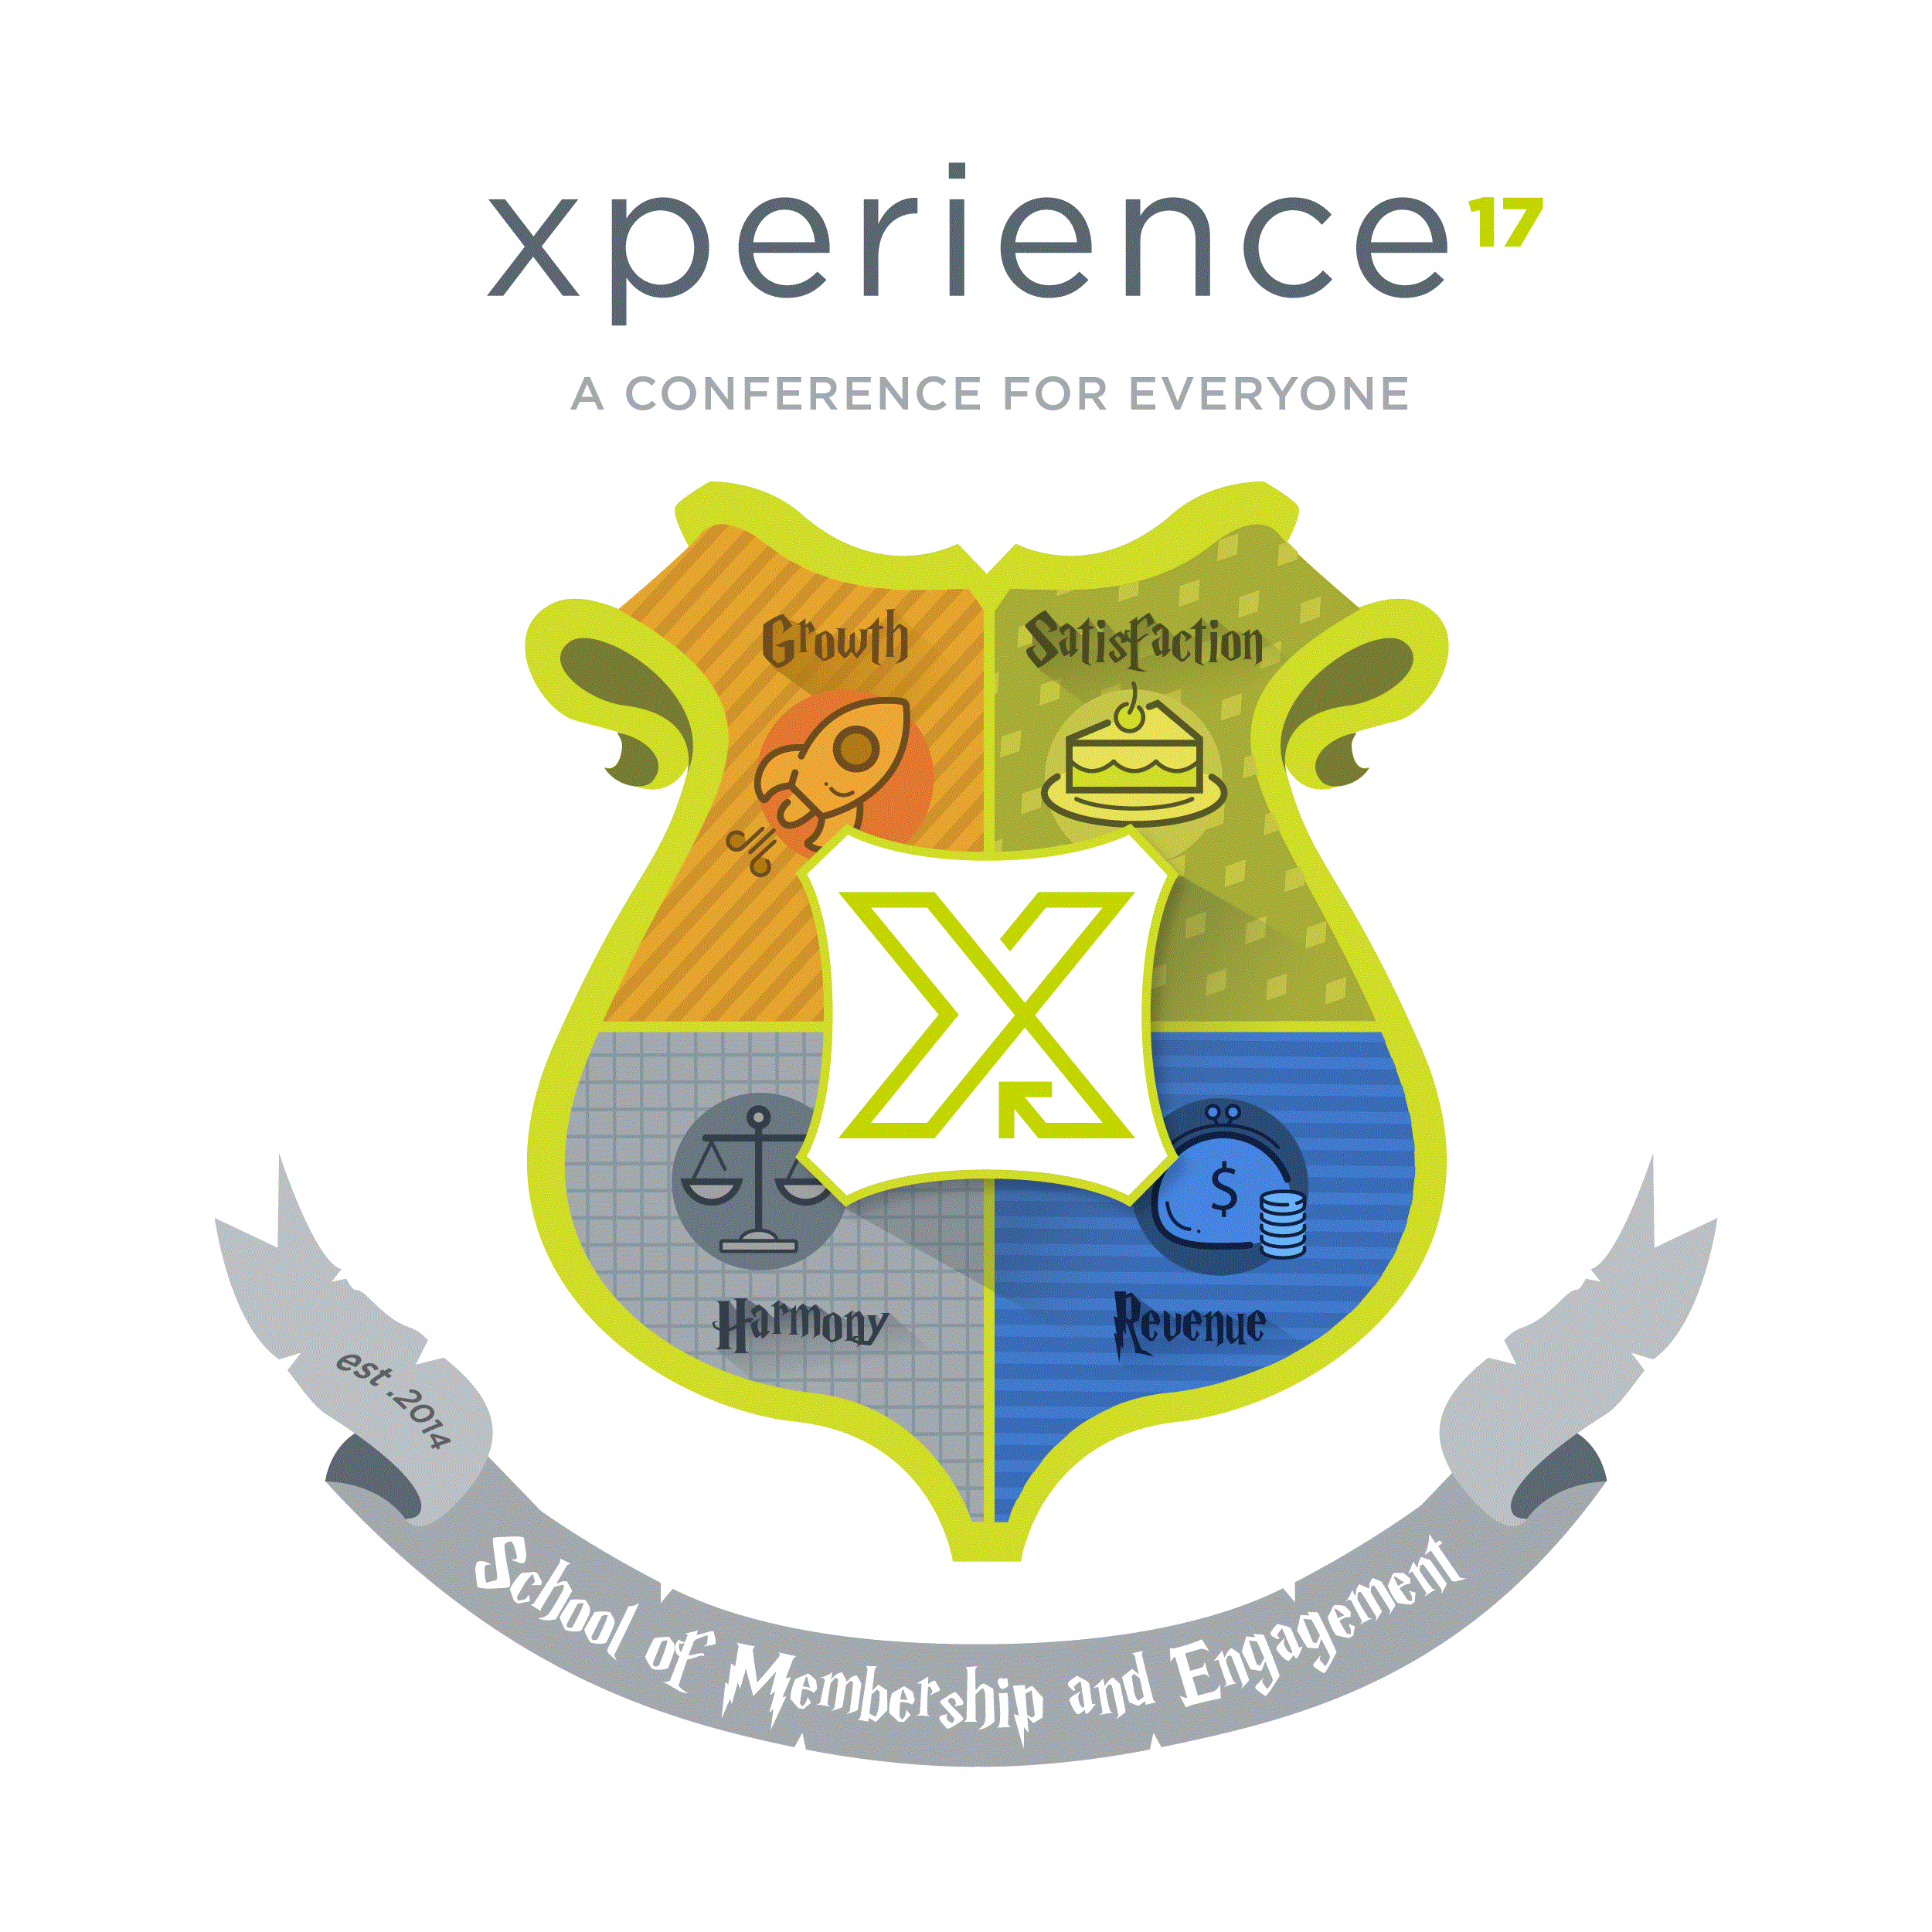 YourMembership Announces Xperience 2017—A Conference for Everyone in